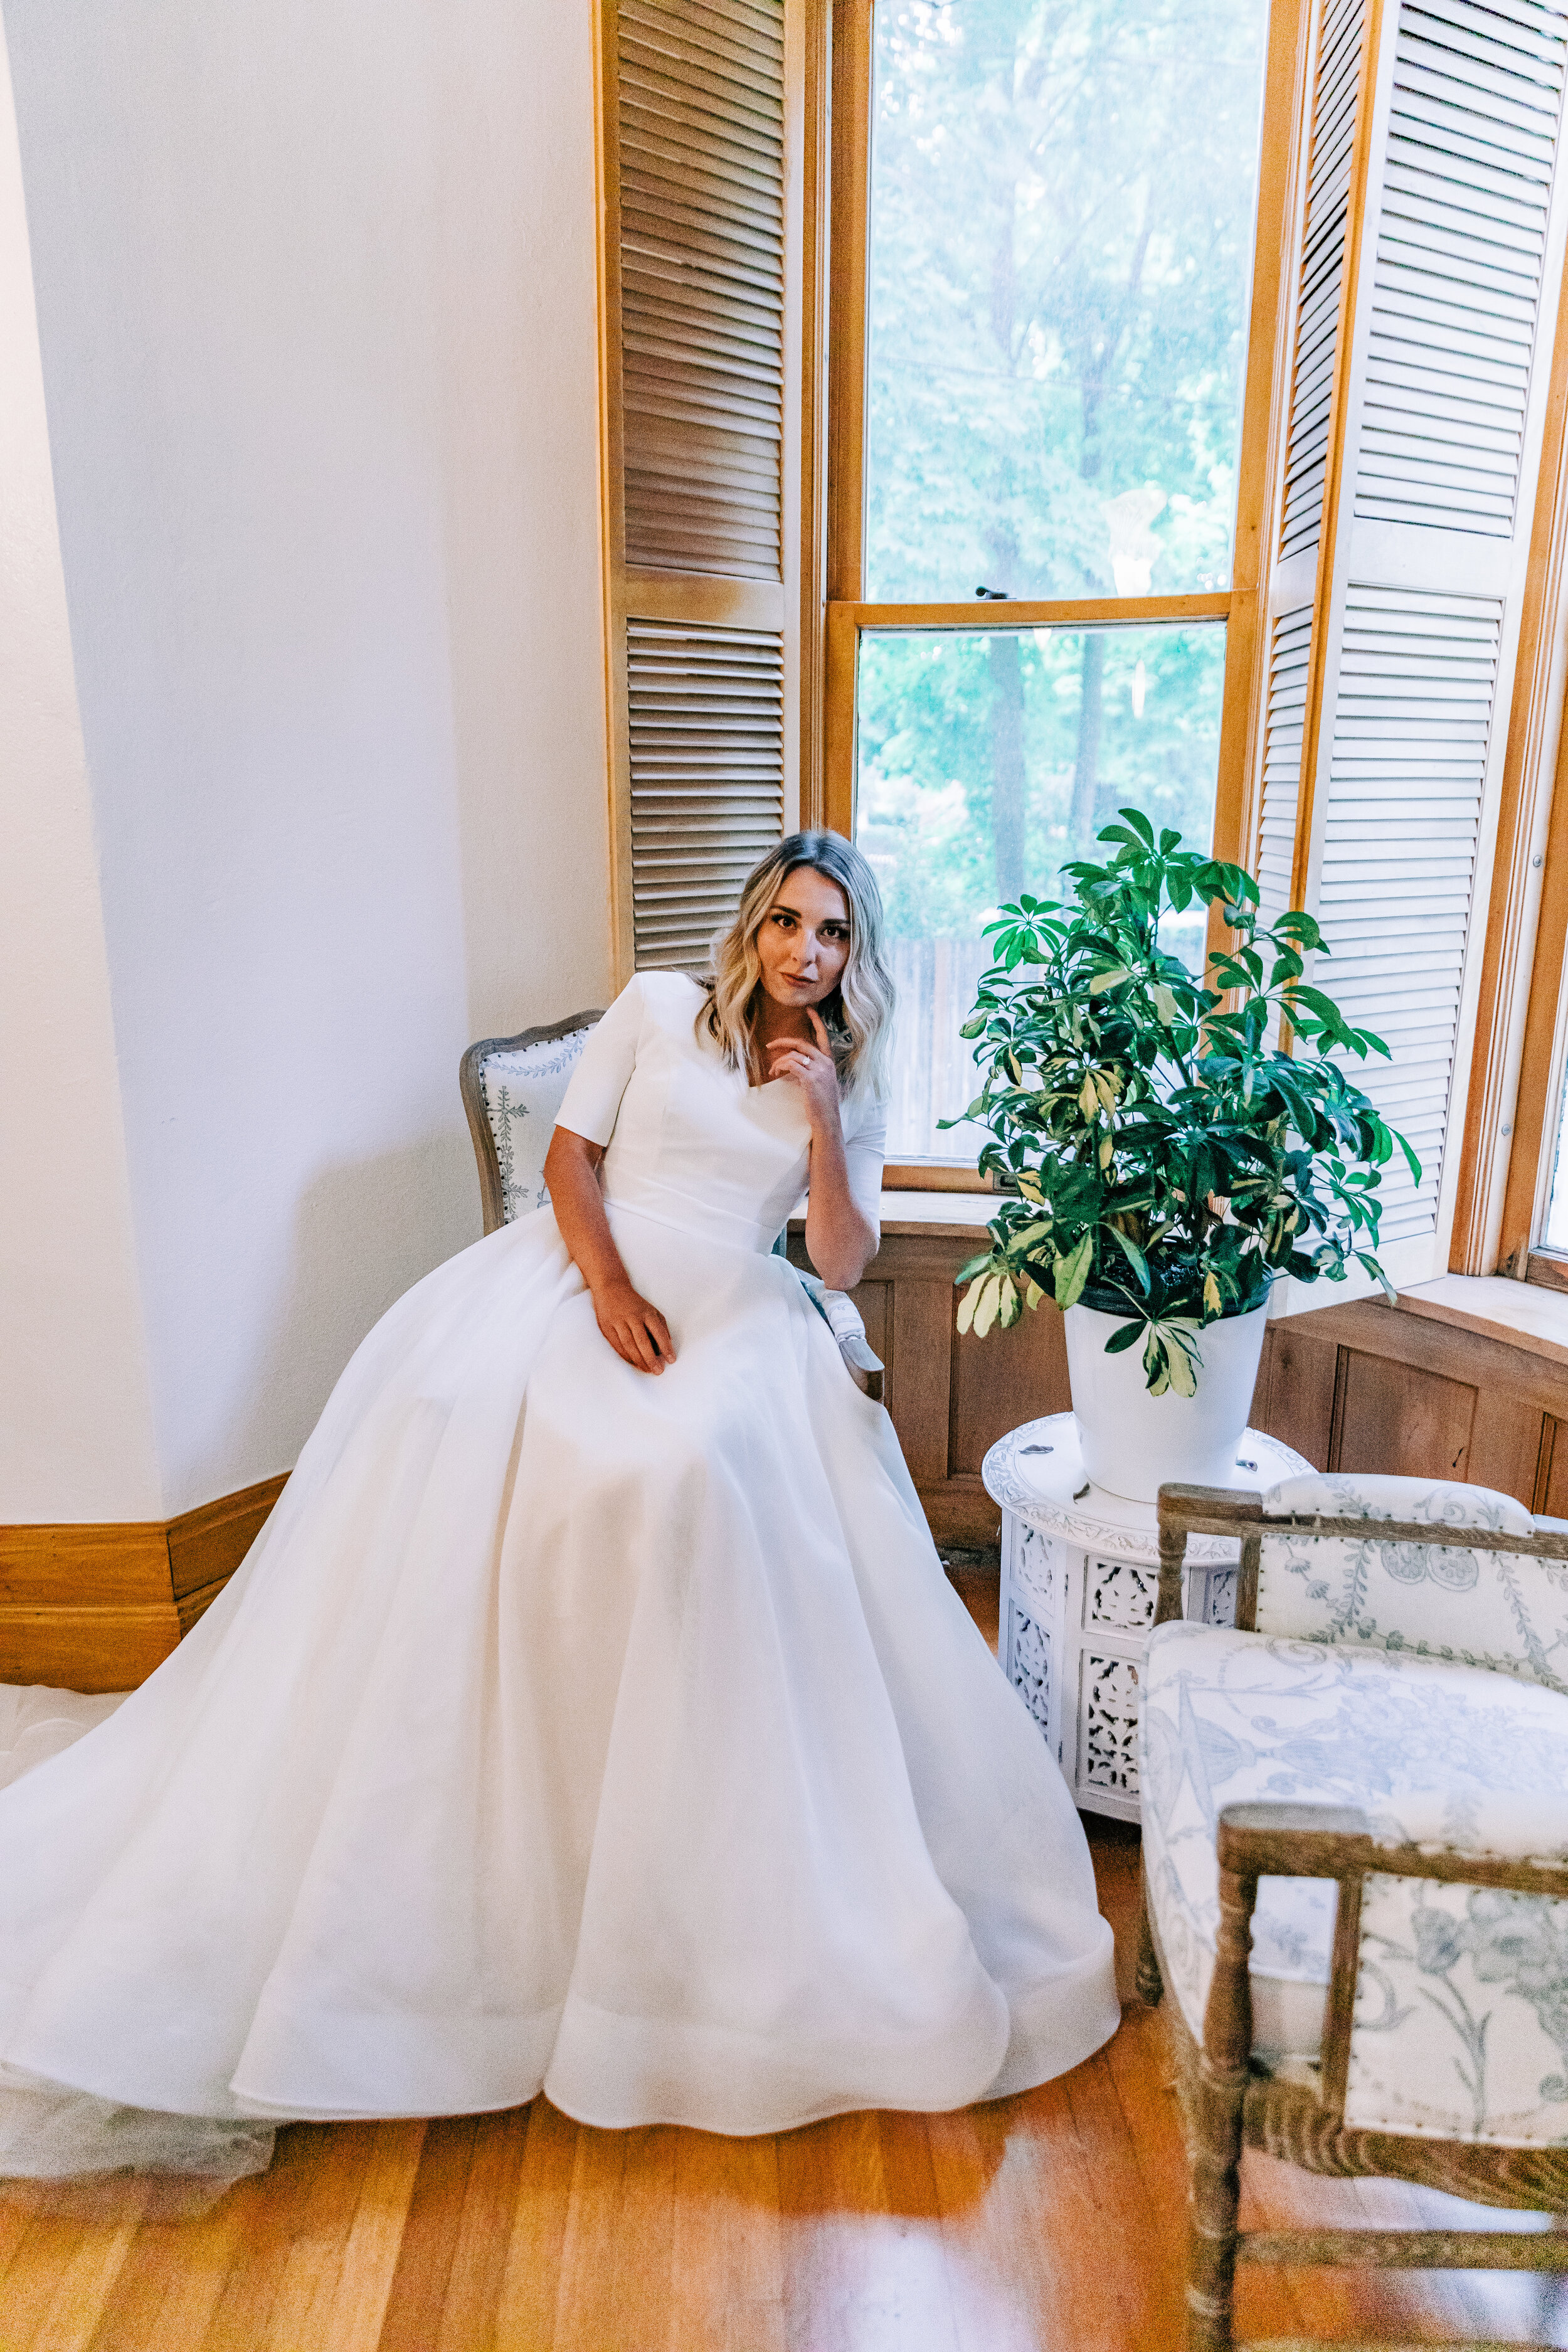  A gorgeous chic bride in a romantic ball gown wedding dress by Elizabeth Cooper Design. Bridal sitting pose inspiration elegant and romantic wedding dress inspiration Utah bridal wedding dress inspiration ideas and goals wedding aesthetic inspiratio